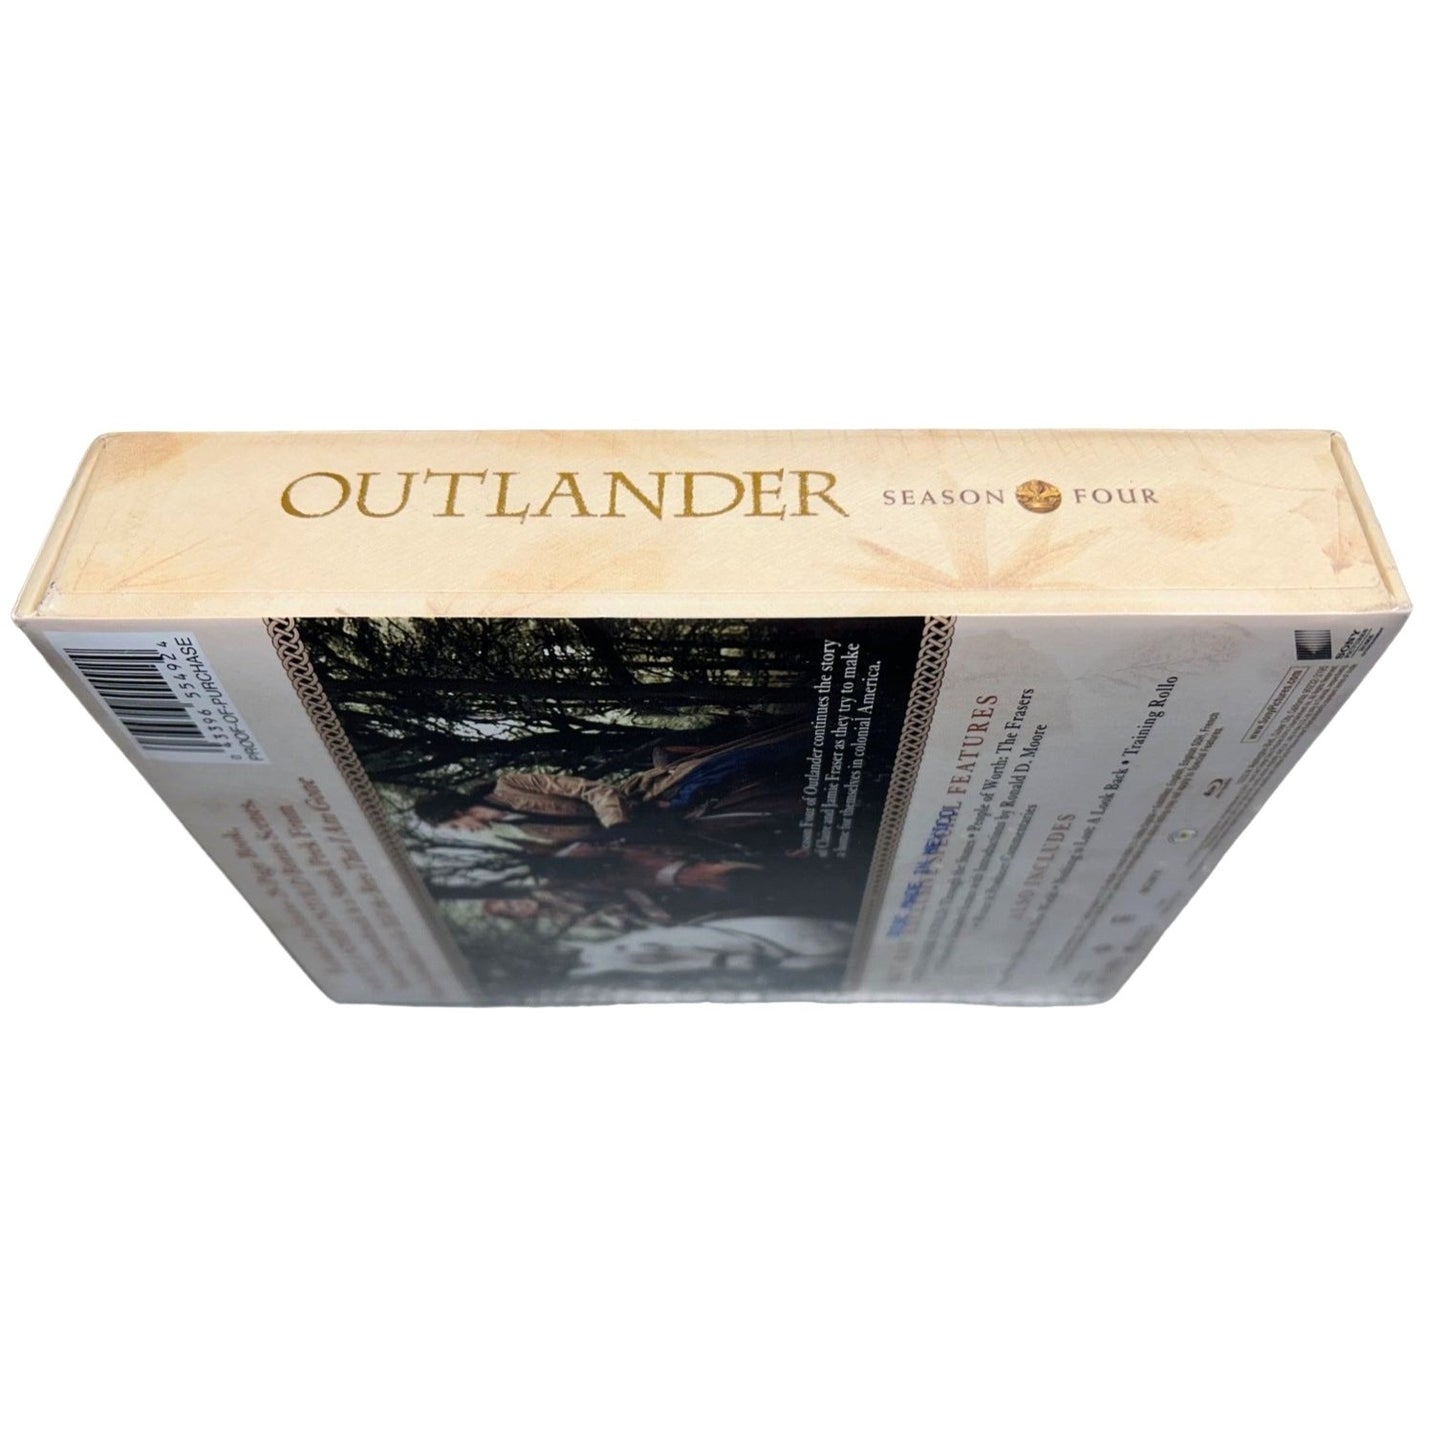 Outlander Season 4 Limited Collector’s Edition BluRay Sony Pictures